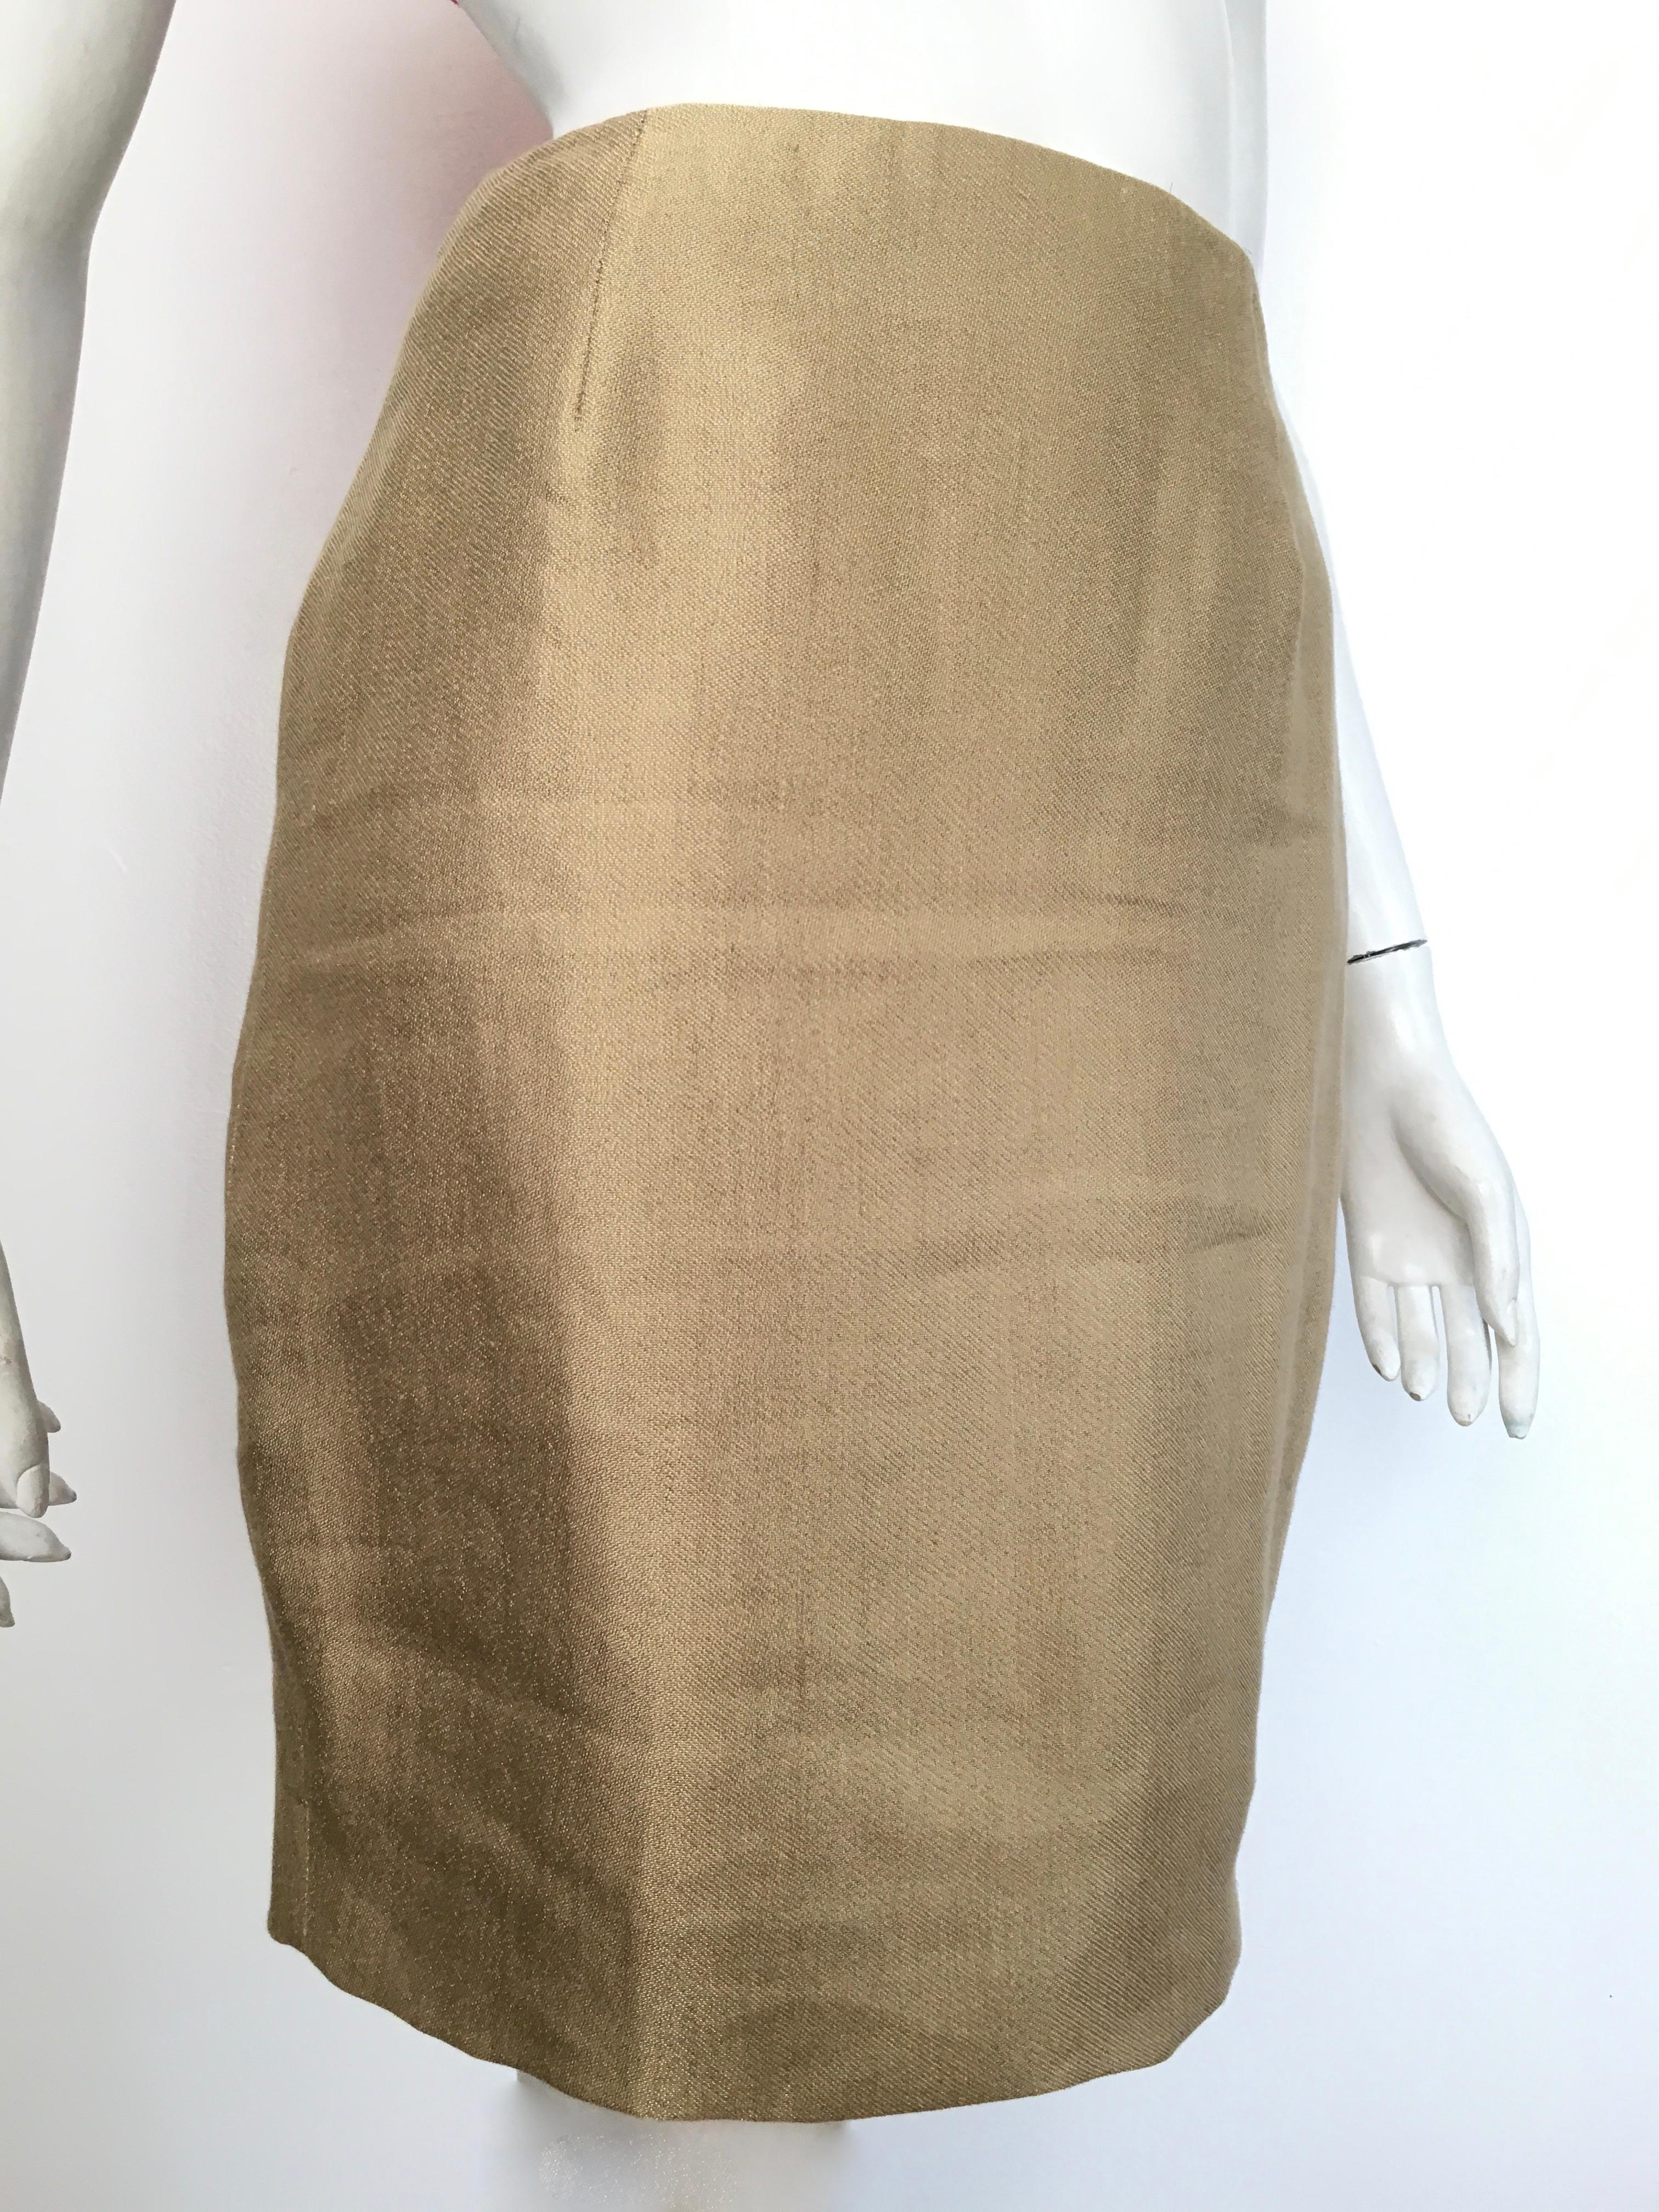 Donna Karan New York 1990s gold short pencil skirt is a size 4.  The waist on this skirt is 27. 1/2